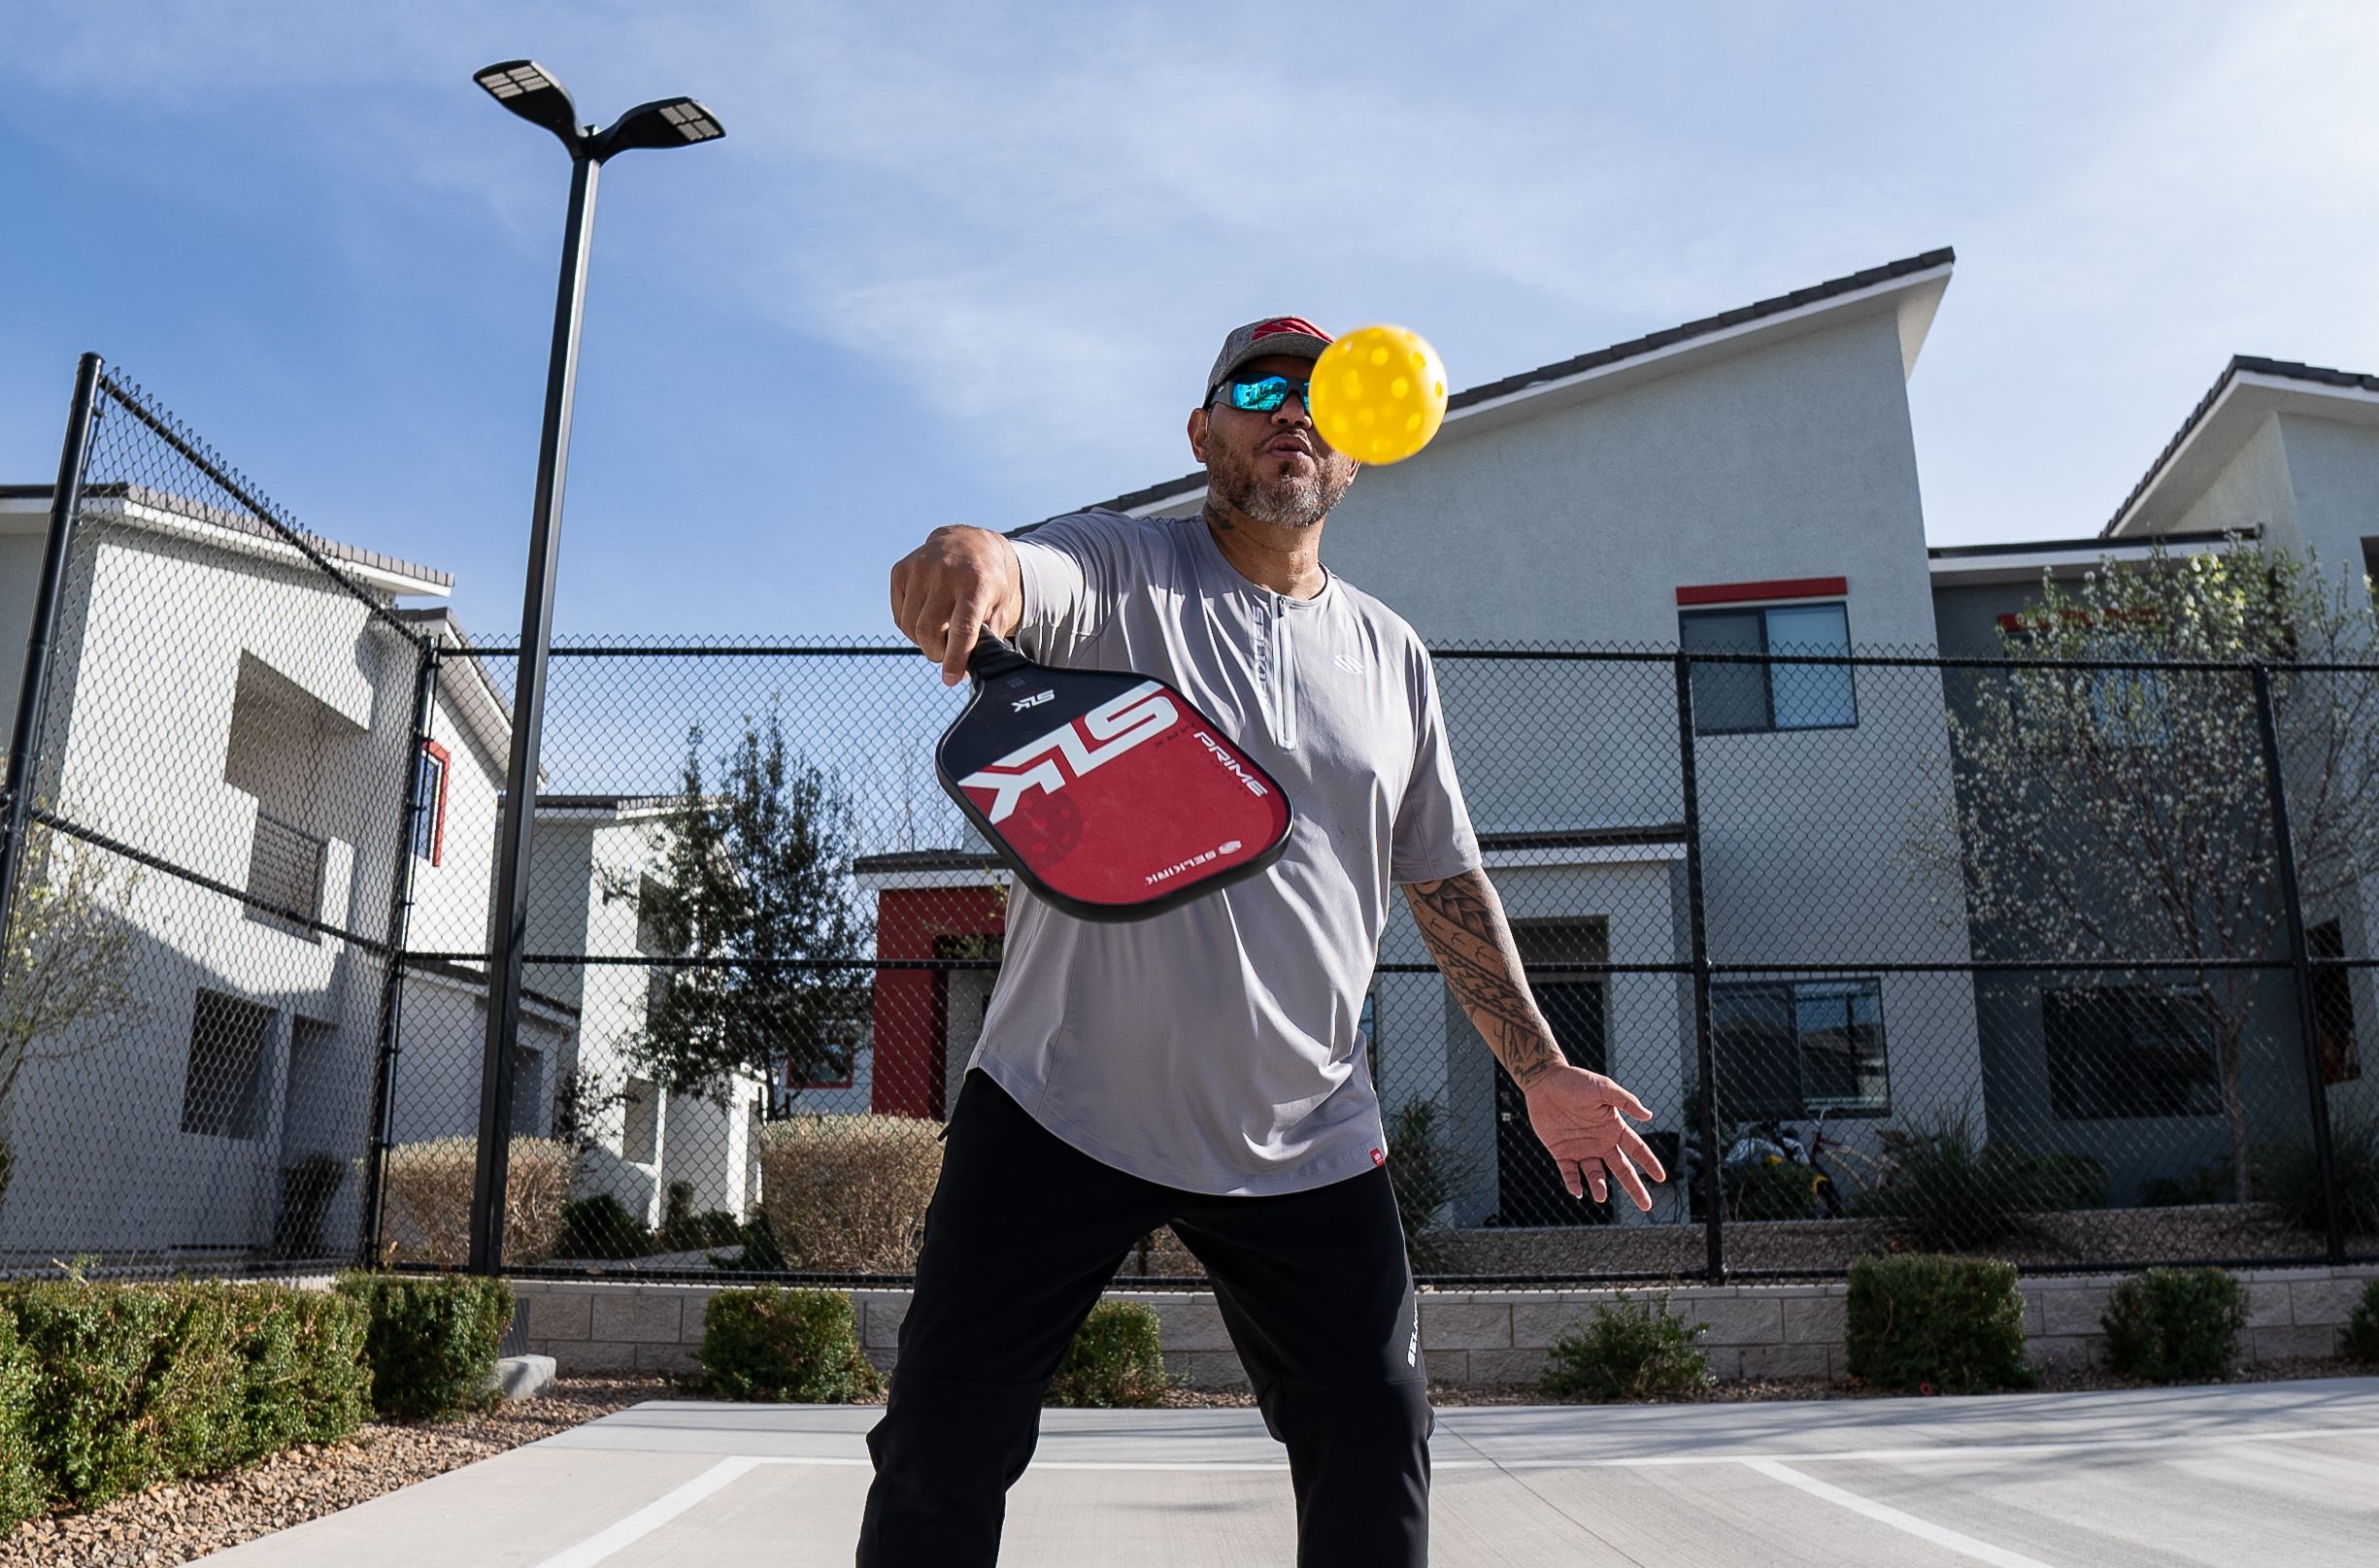 As you learn the official rules of pickleball, you will also want to learn court etiquette and other unspoken rules of the pickleball court. Here are some of our pickleball tips that no one tells you.